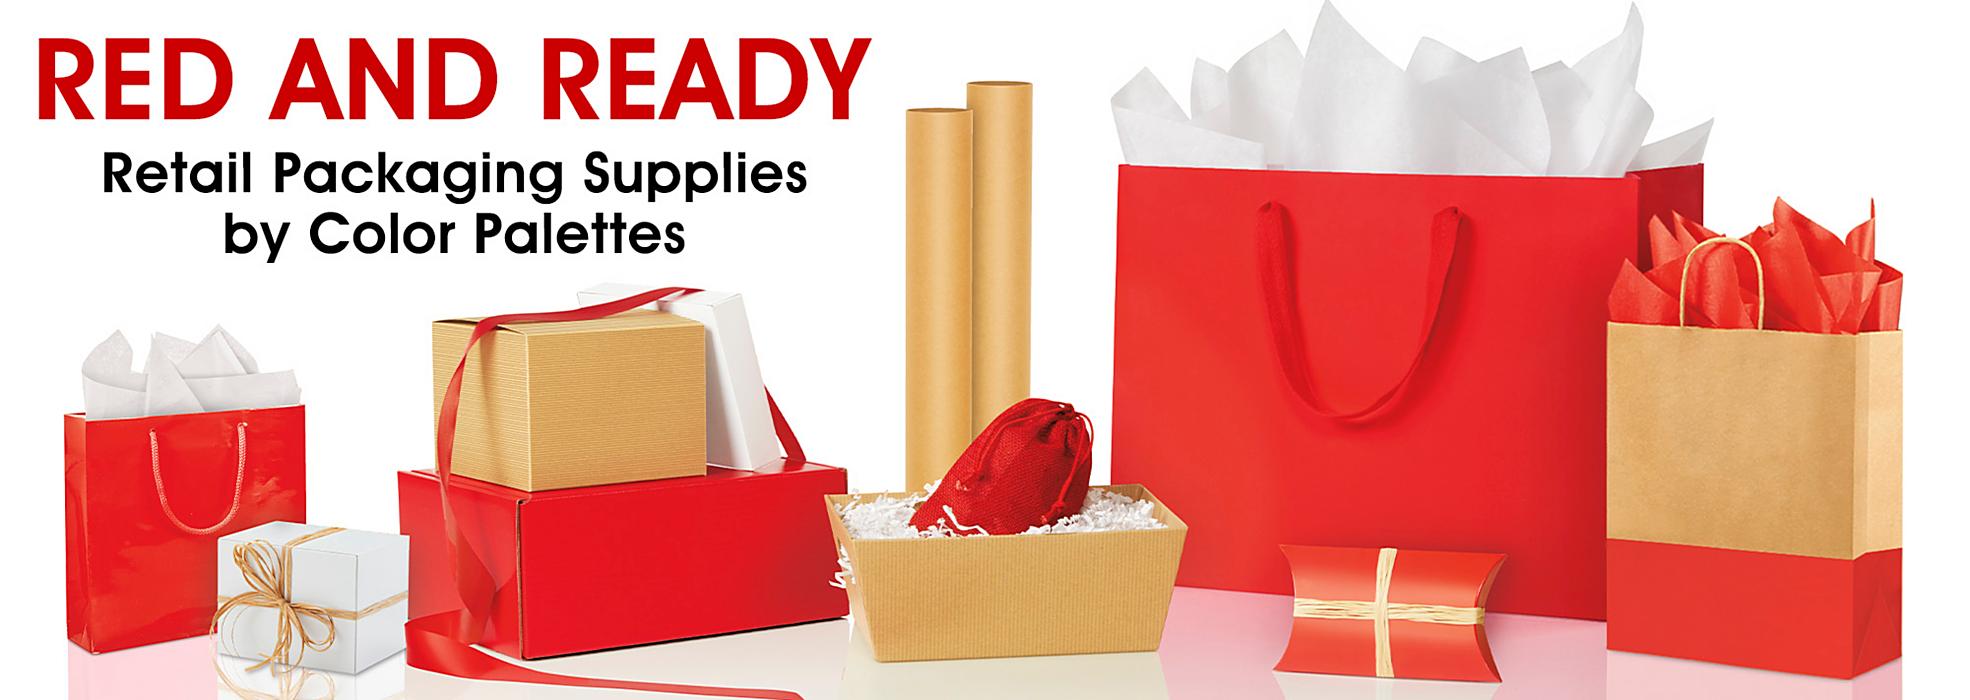 Red and Ready - Retail Packaging Supplies by Color Palettes